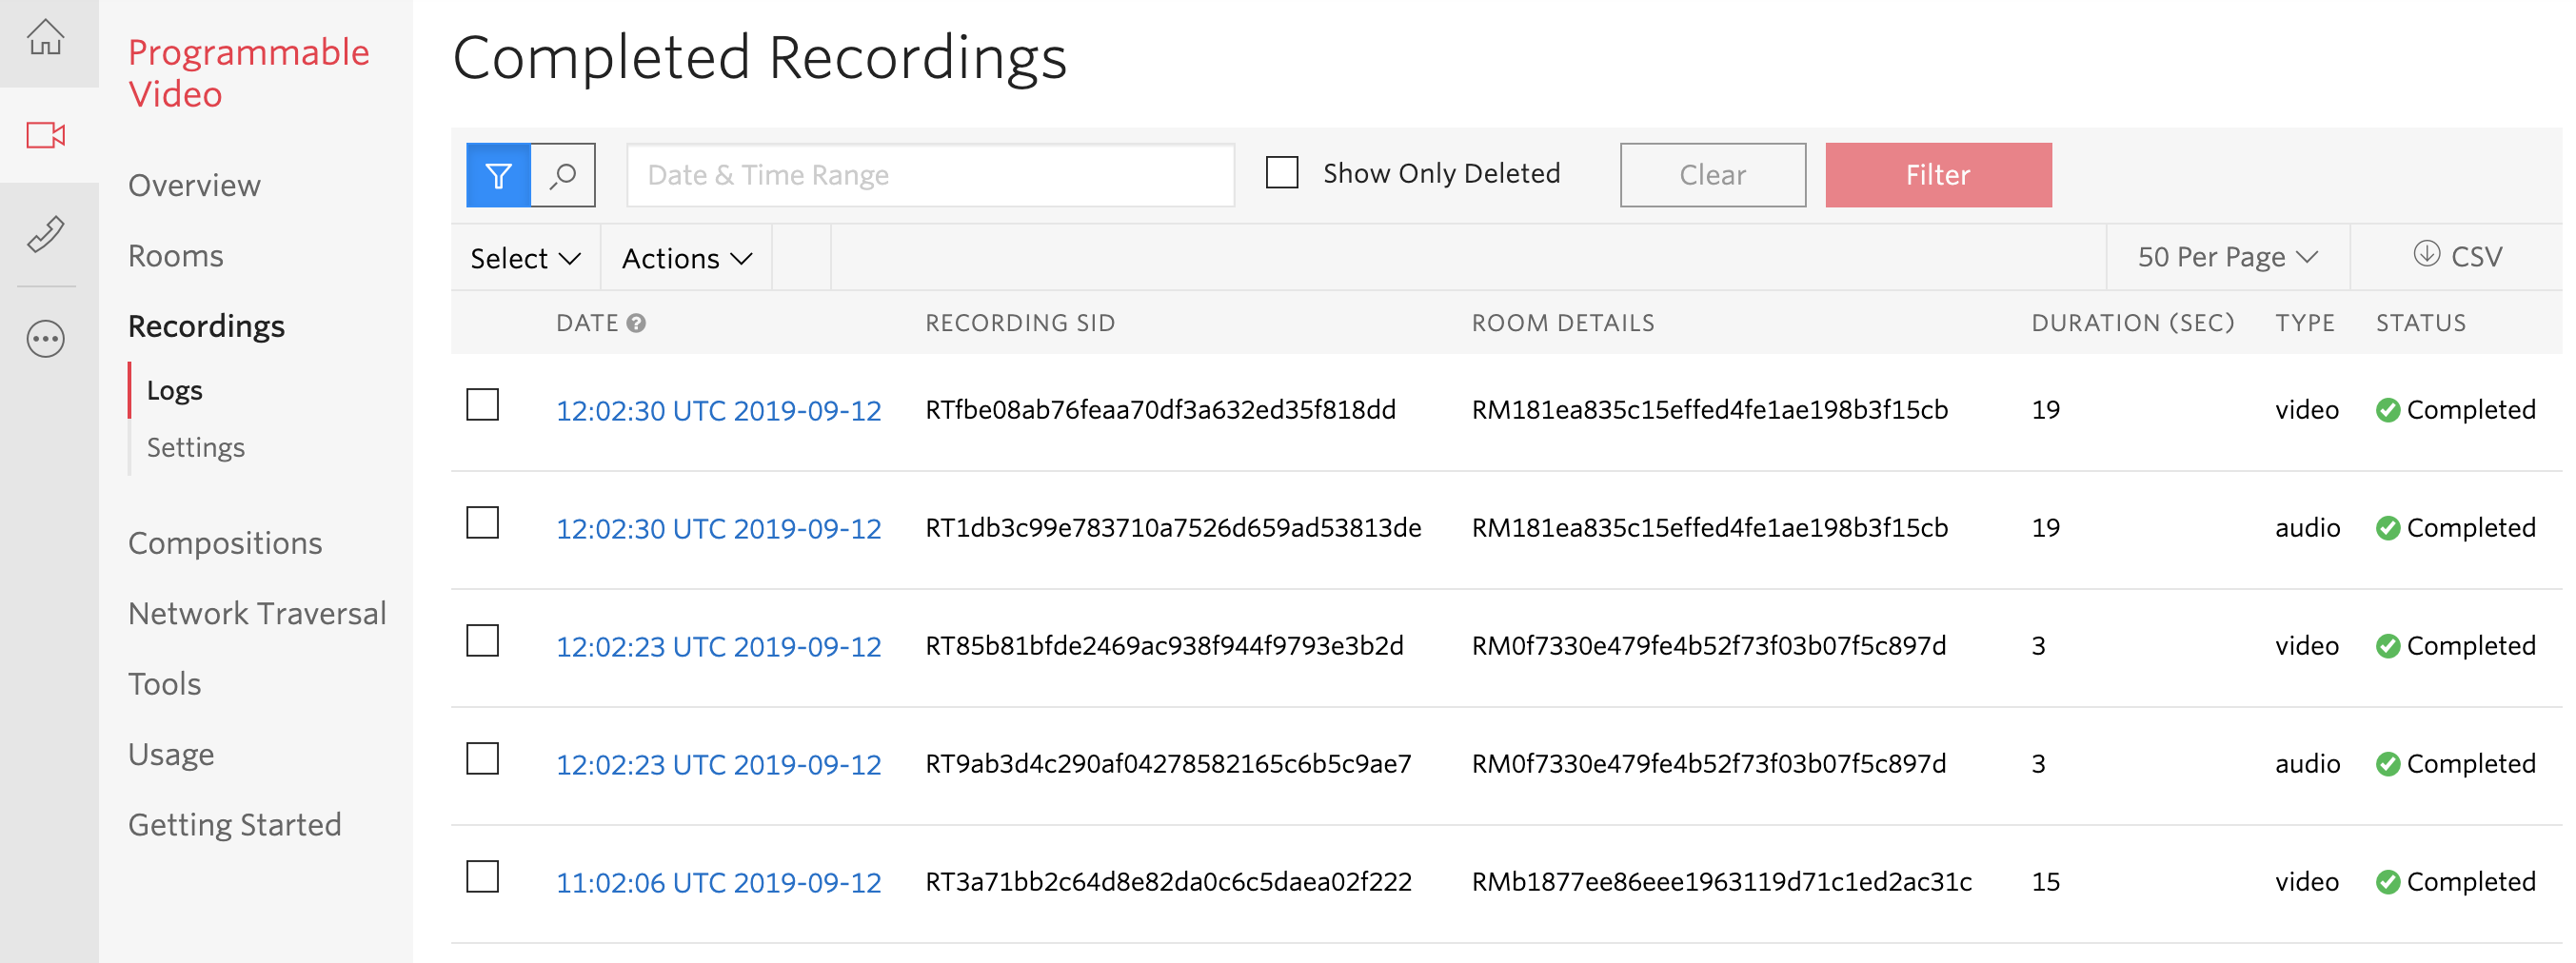 Video Recordings Logs Console page.